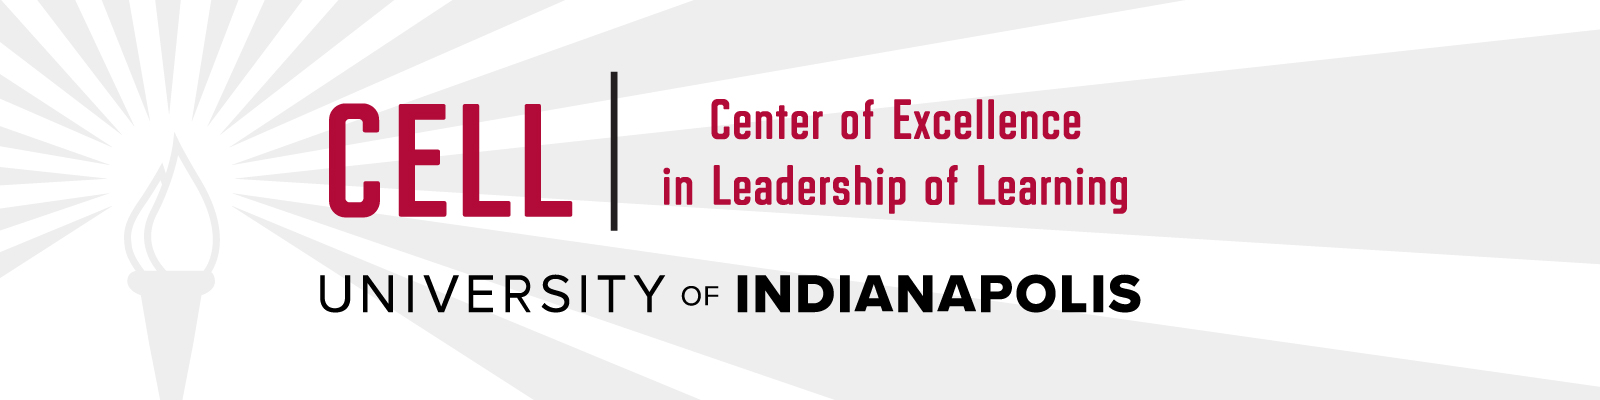 Center of Excellence in Leadership of Learning - 2020 wordmark